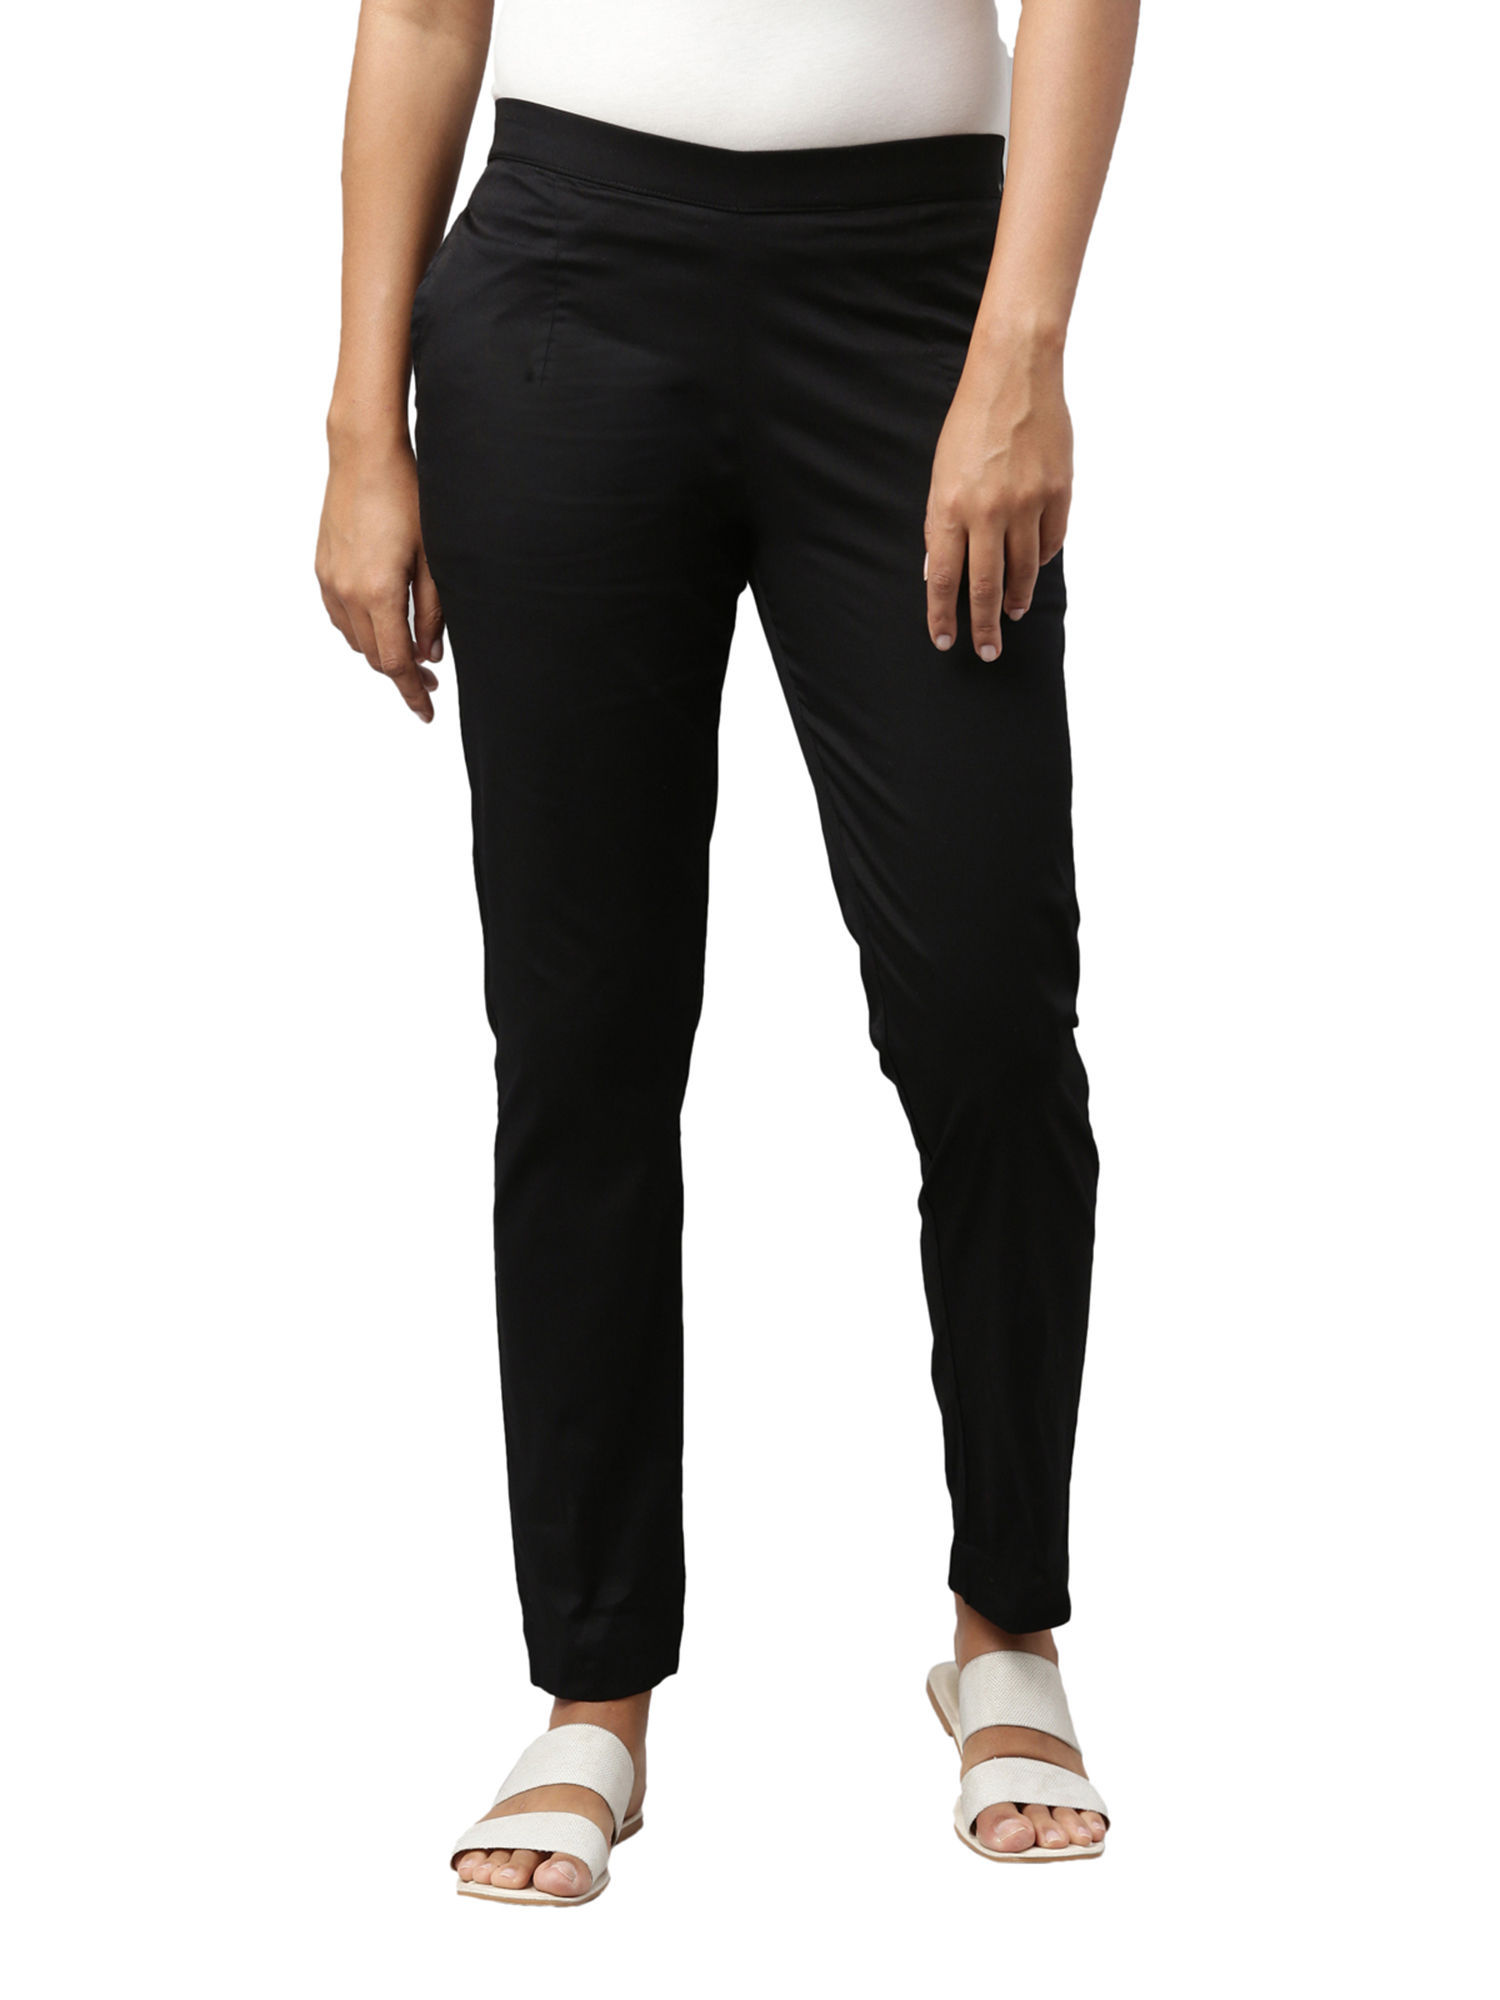 Buy Bamans Yoga Dress Pants Skinny Leg Pull on Stretch Pant for Women with  Pockets Black Small at Amazonin